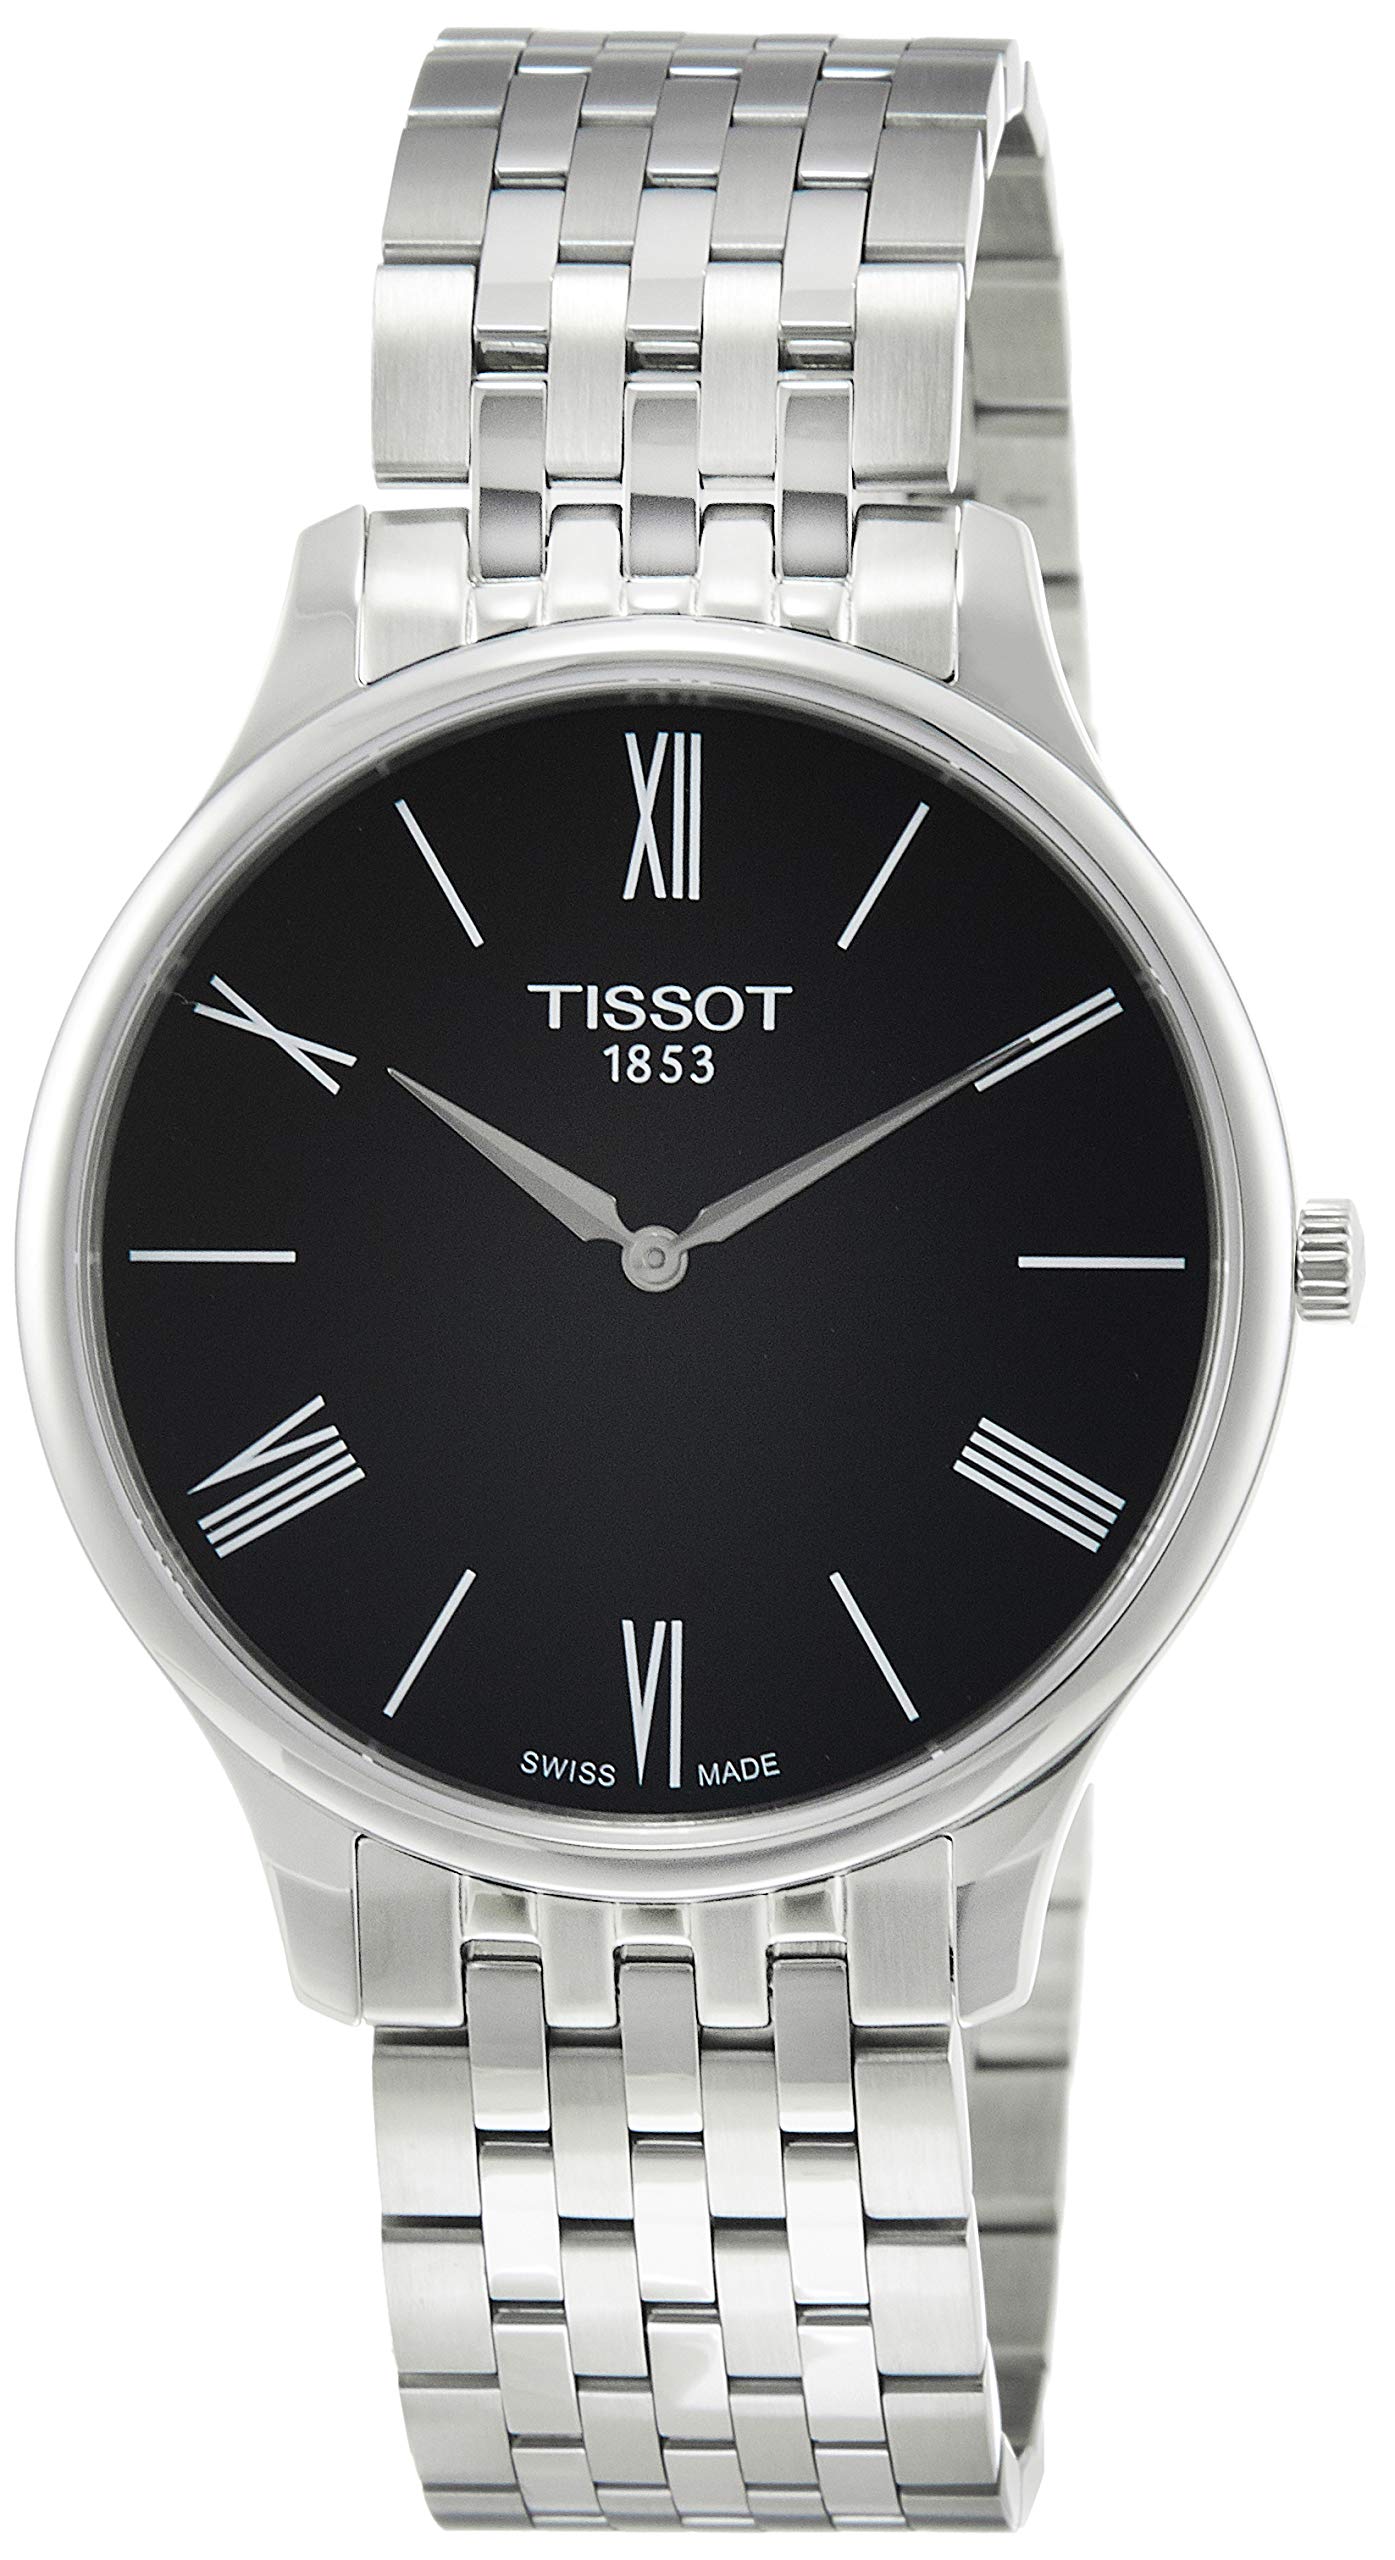 Tissot Tradition 5.5 Stainless Steel Mens Watch T0634091105800